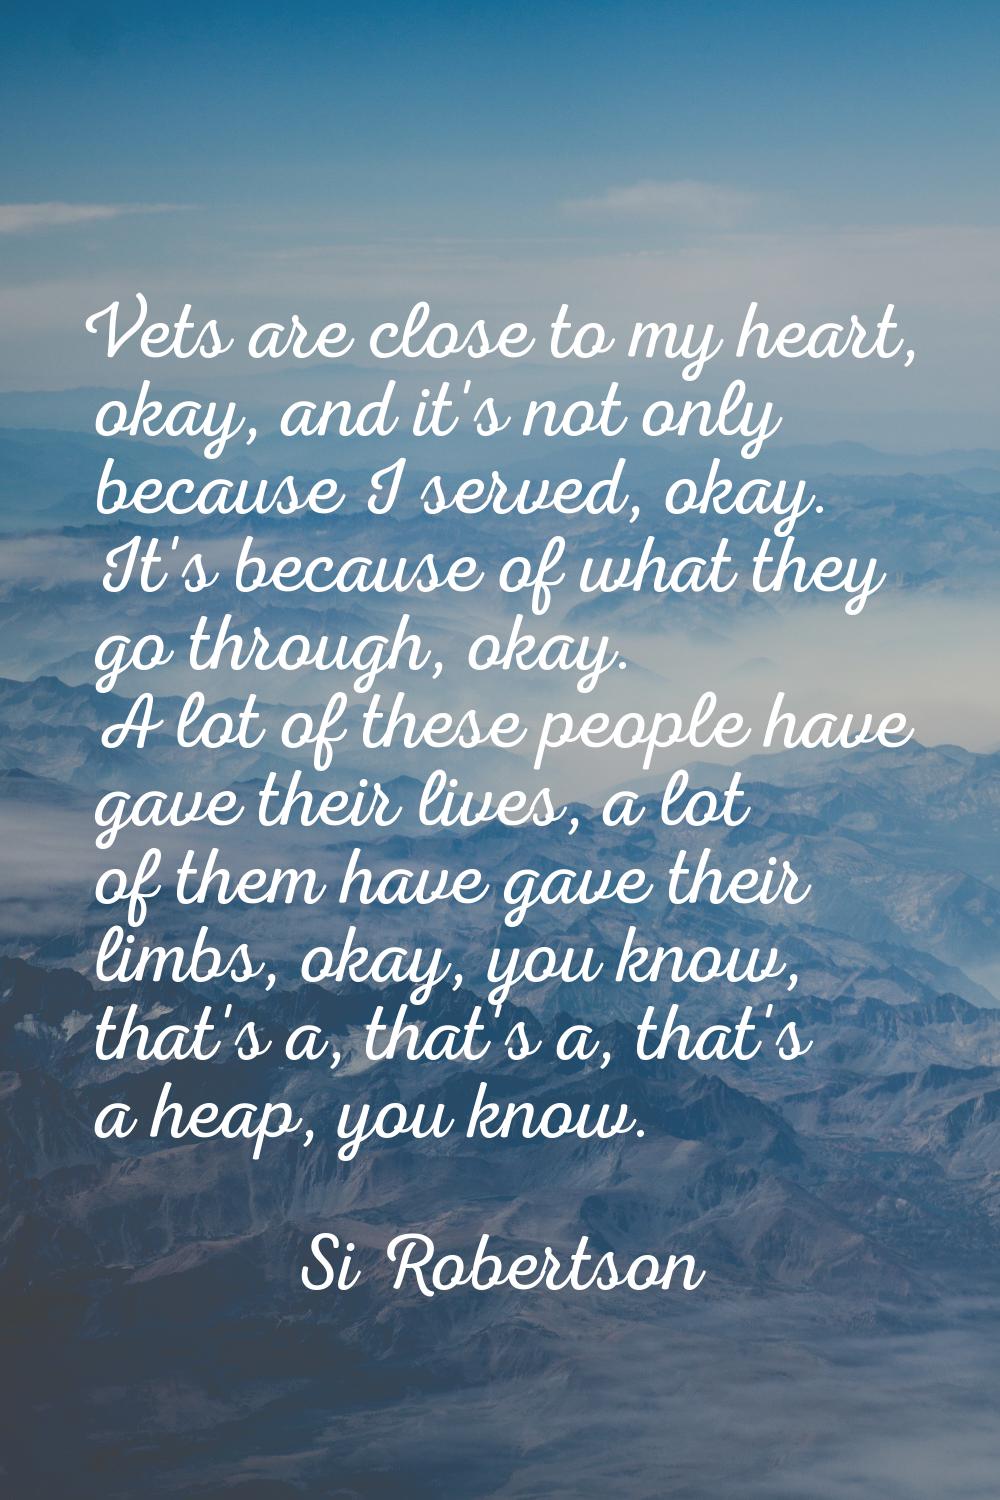 Vets are close to my heart, okay, and it's not only because I served, okay. It's because of what th